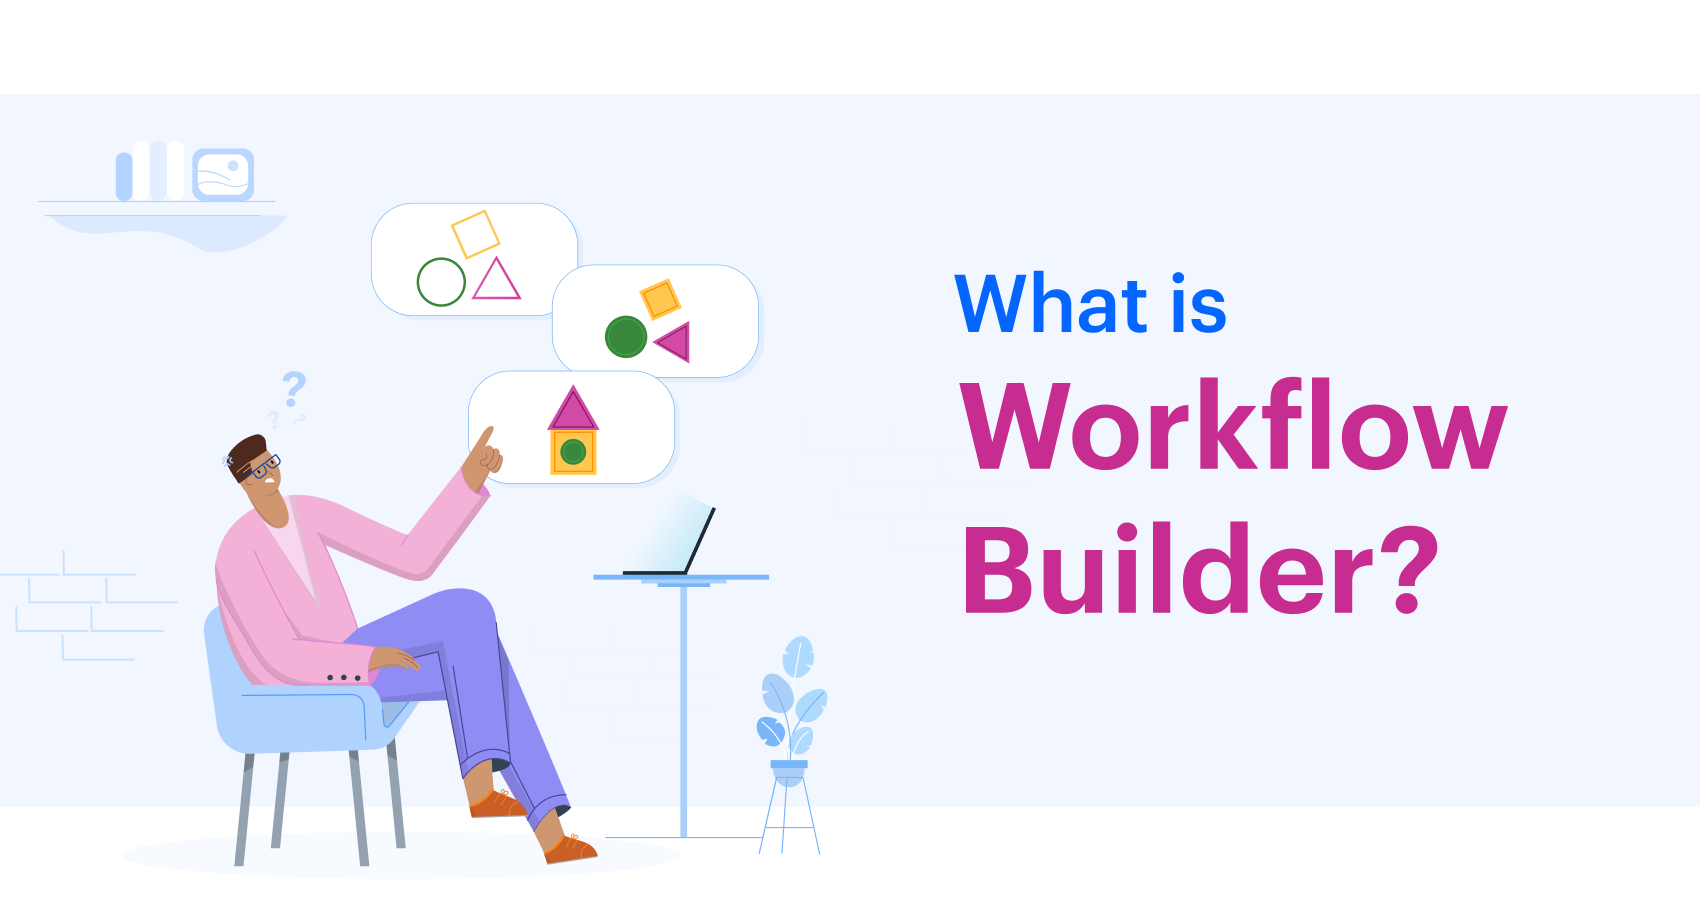 What is Workflow Builder